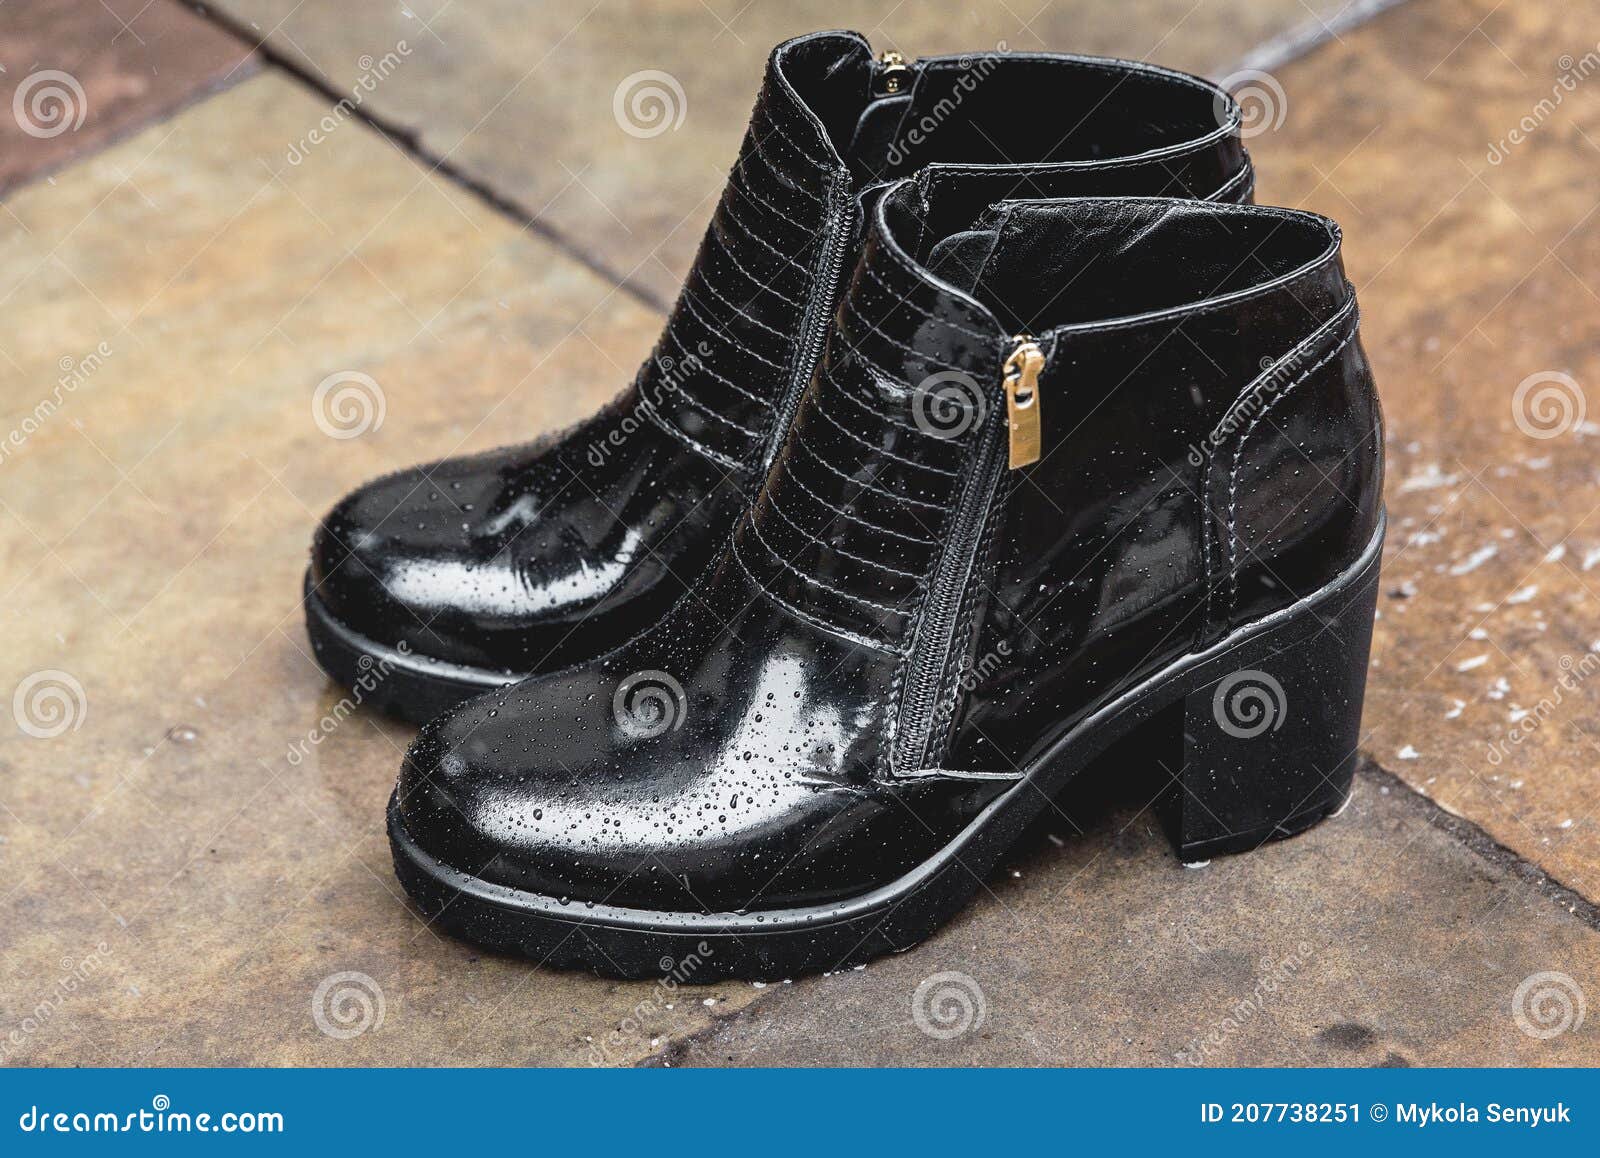 Women S Black Patent Leather Boots. Street Photo. Fashion Advertising ...